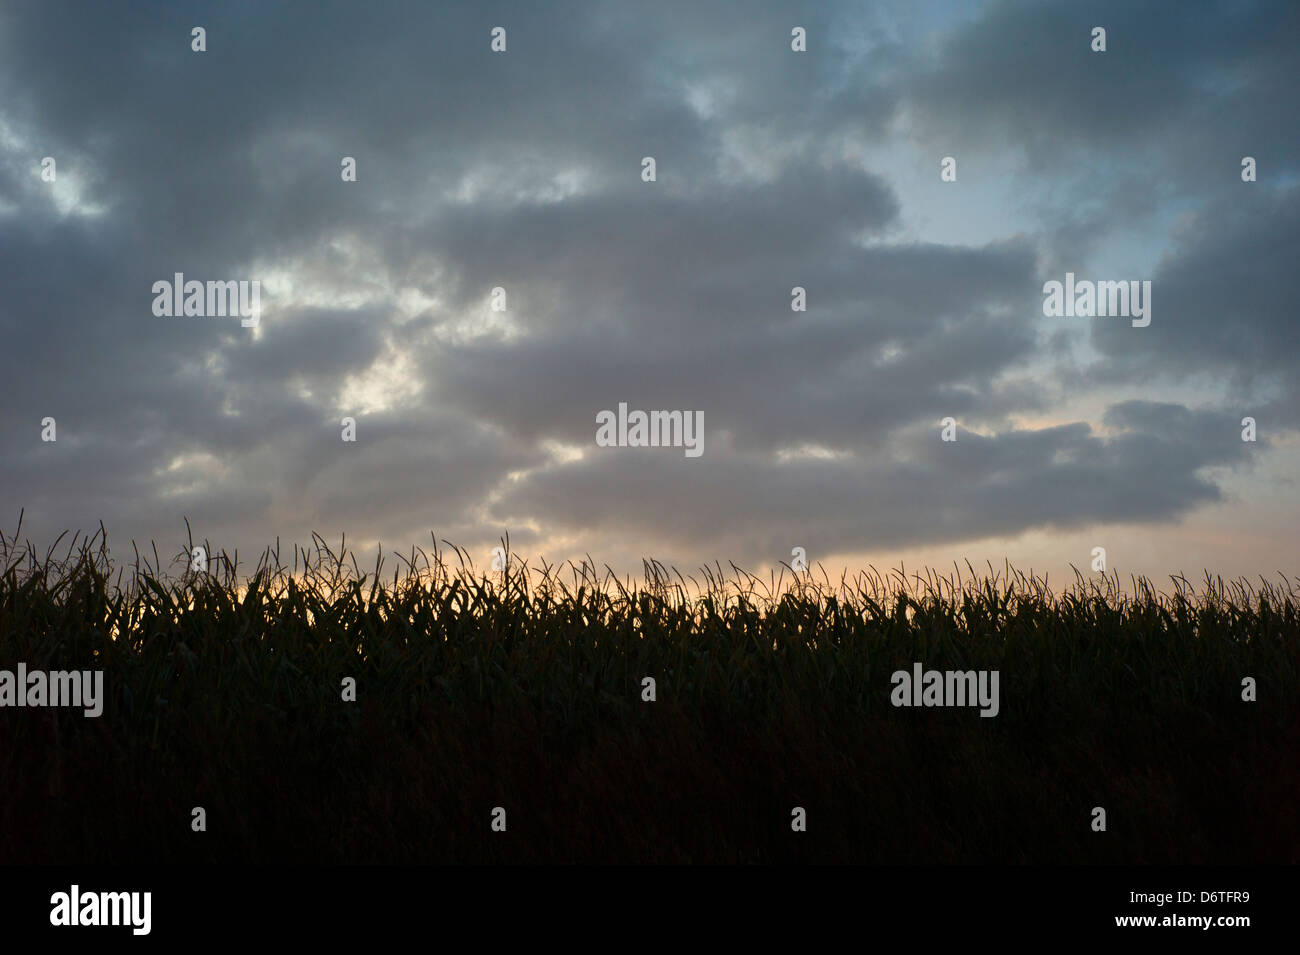 Sunrise and stormy sky over maize crop, Normandy, France Stock Photo